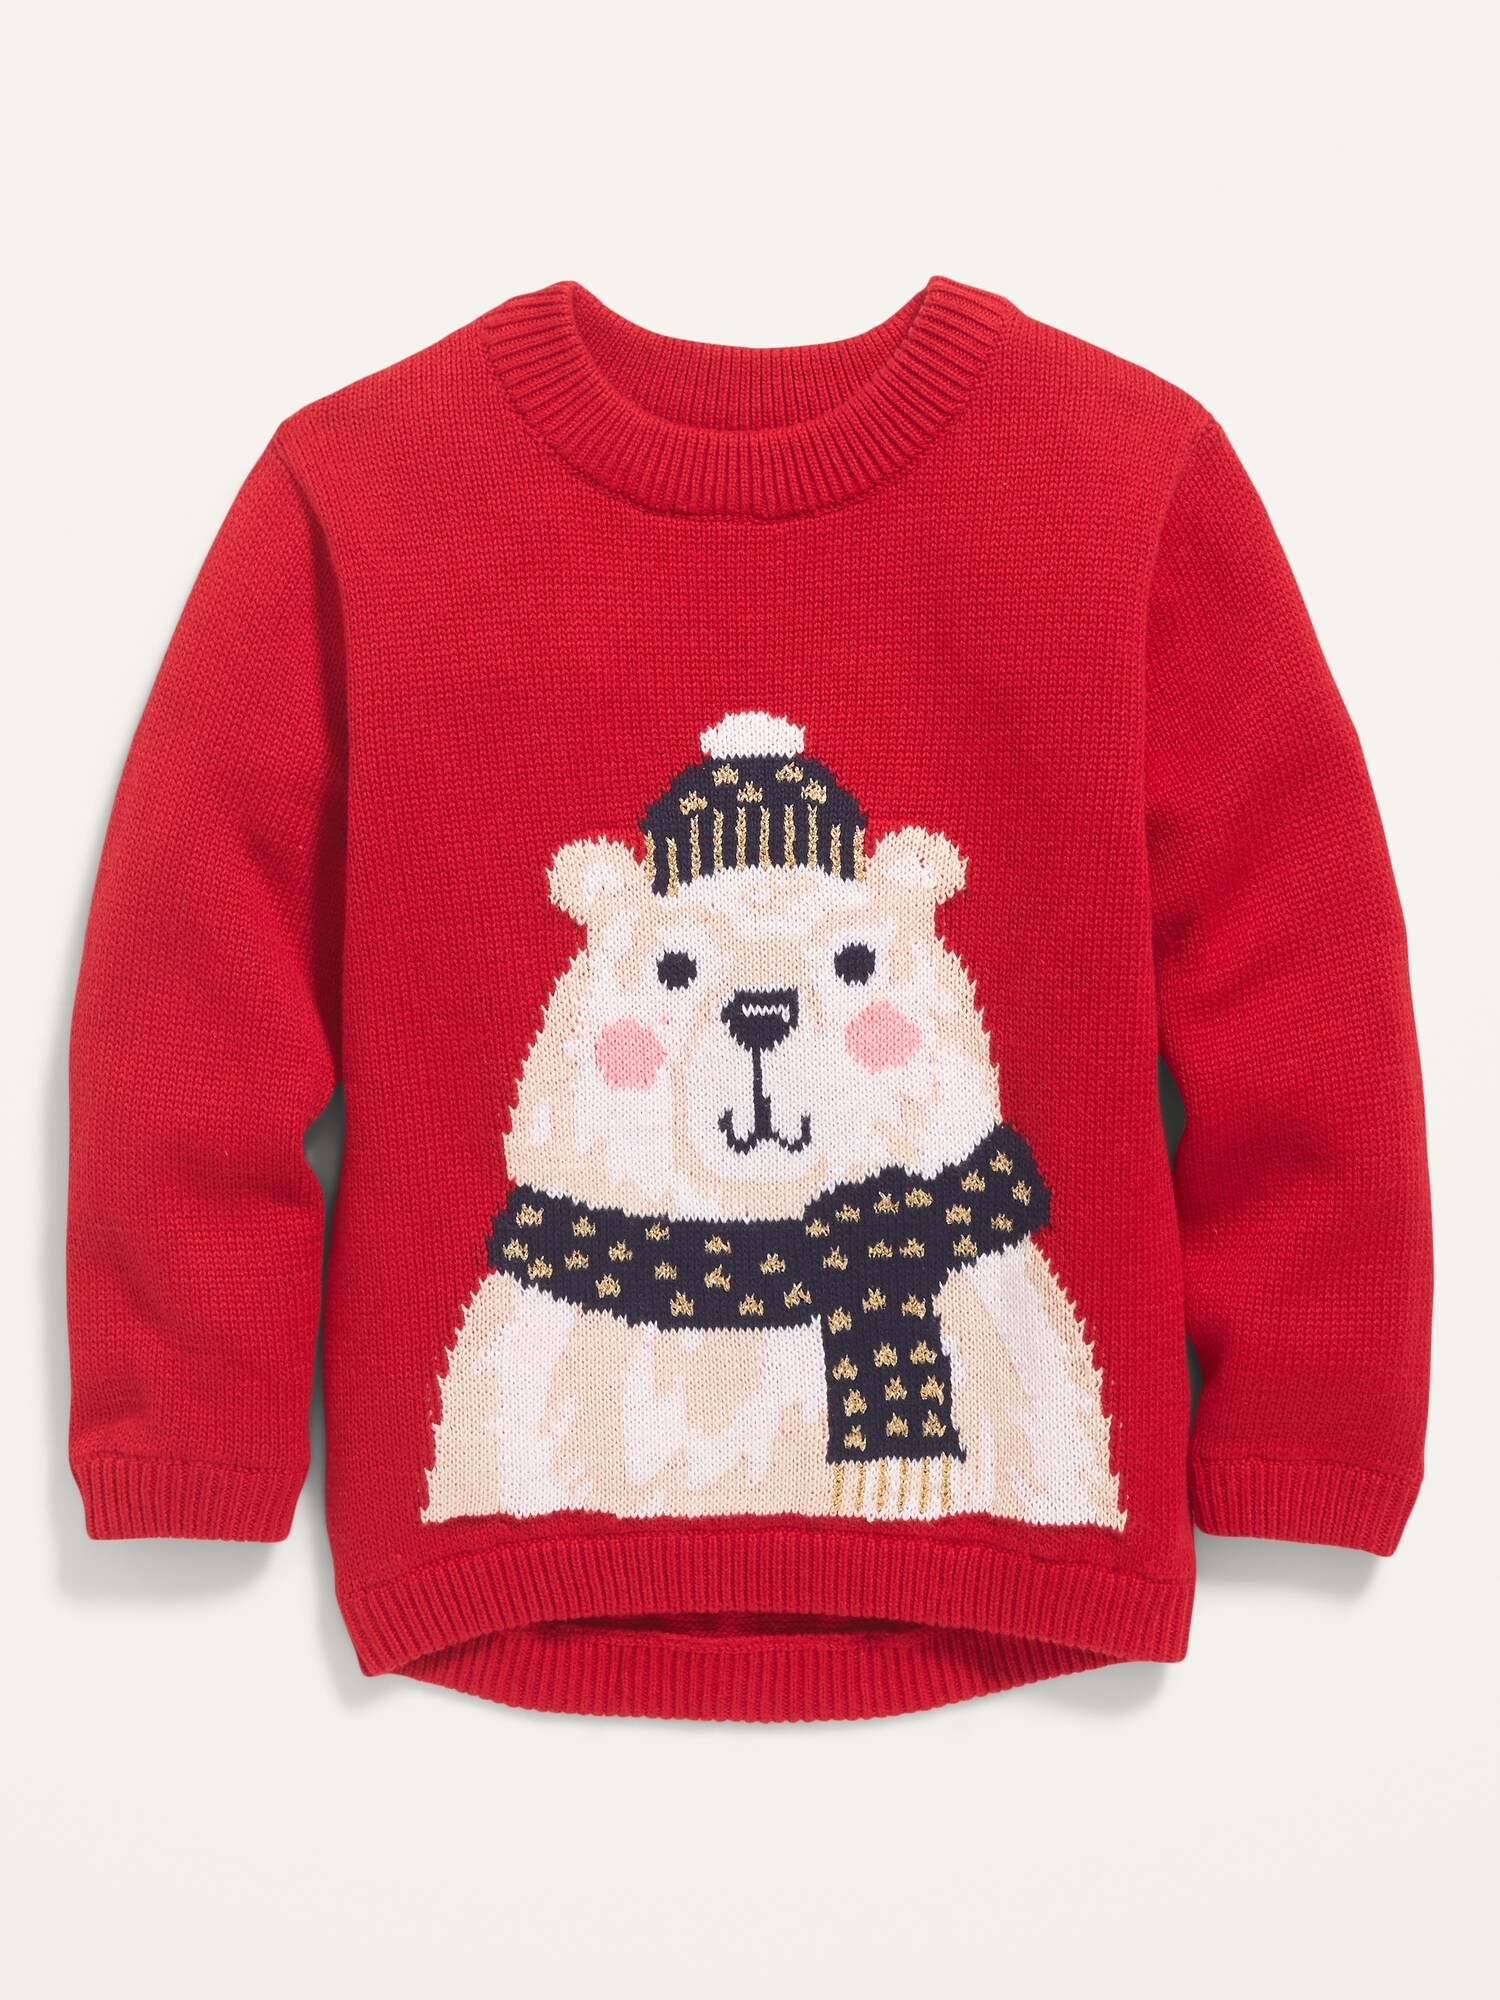 Bear-Critter Graphic Pullover Sweater for Toddler Girls 